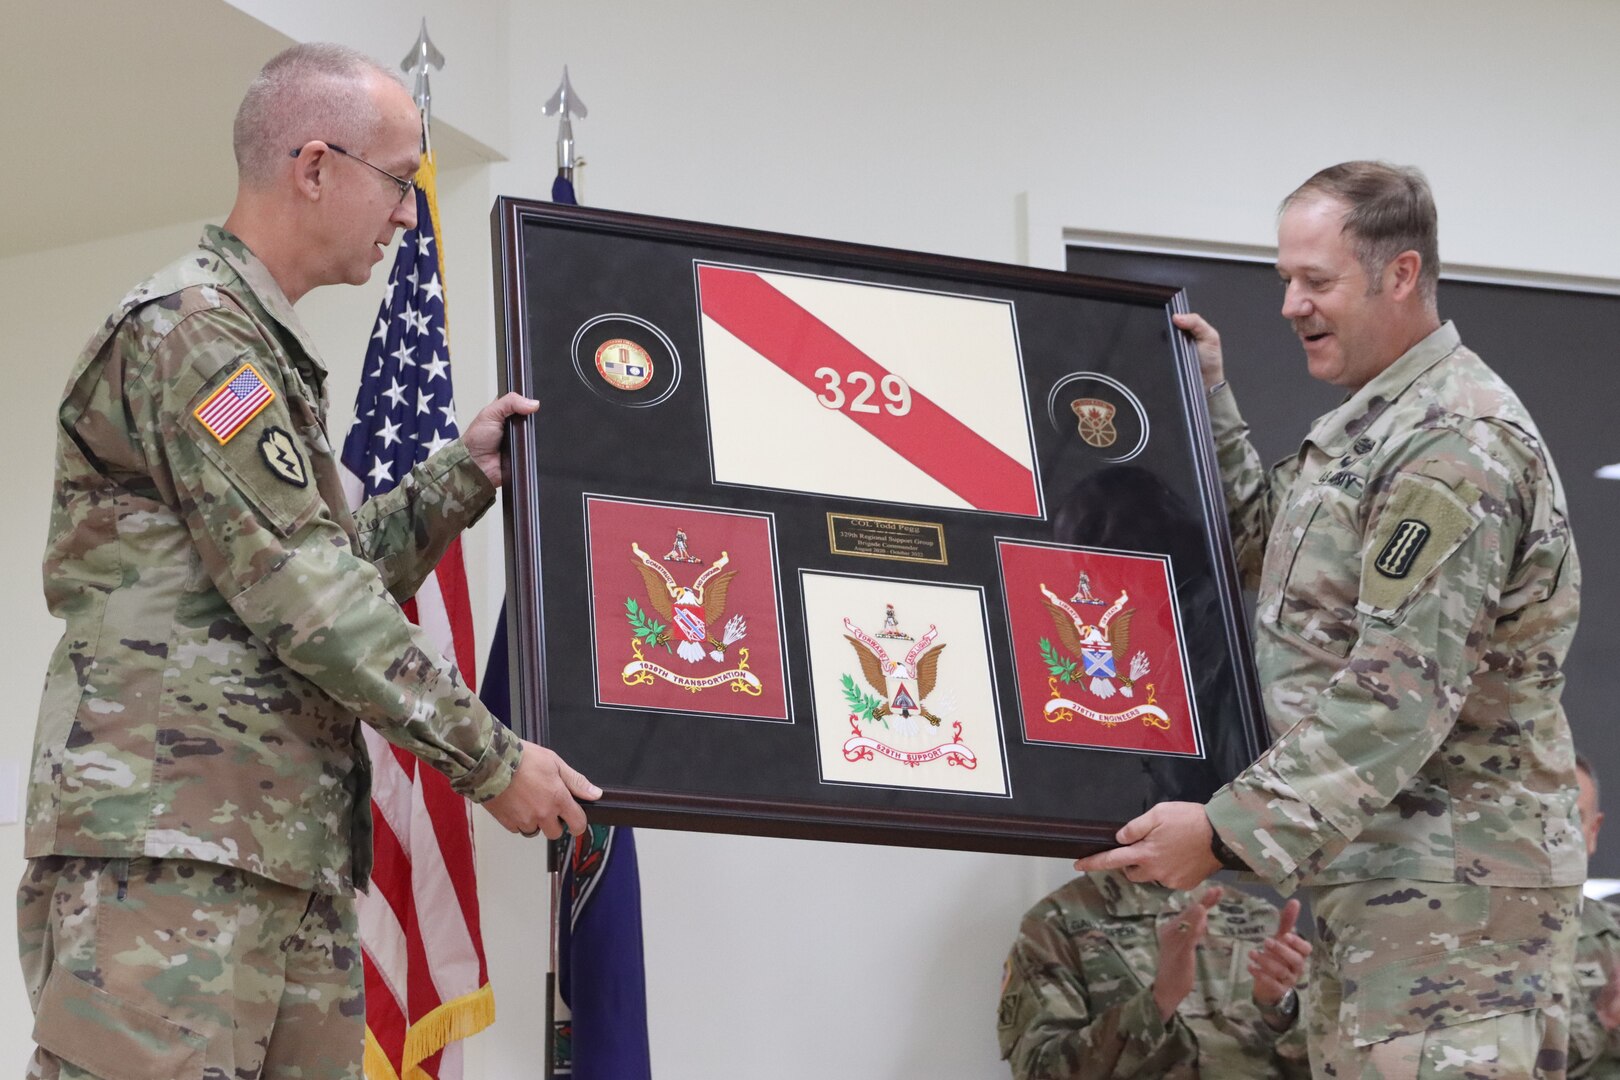 Rohler succeeds Pegg as 329th RSG commander